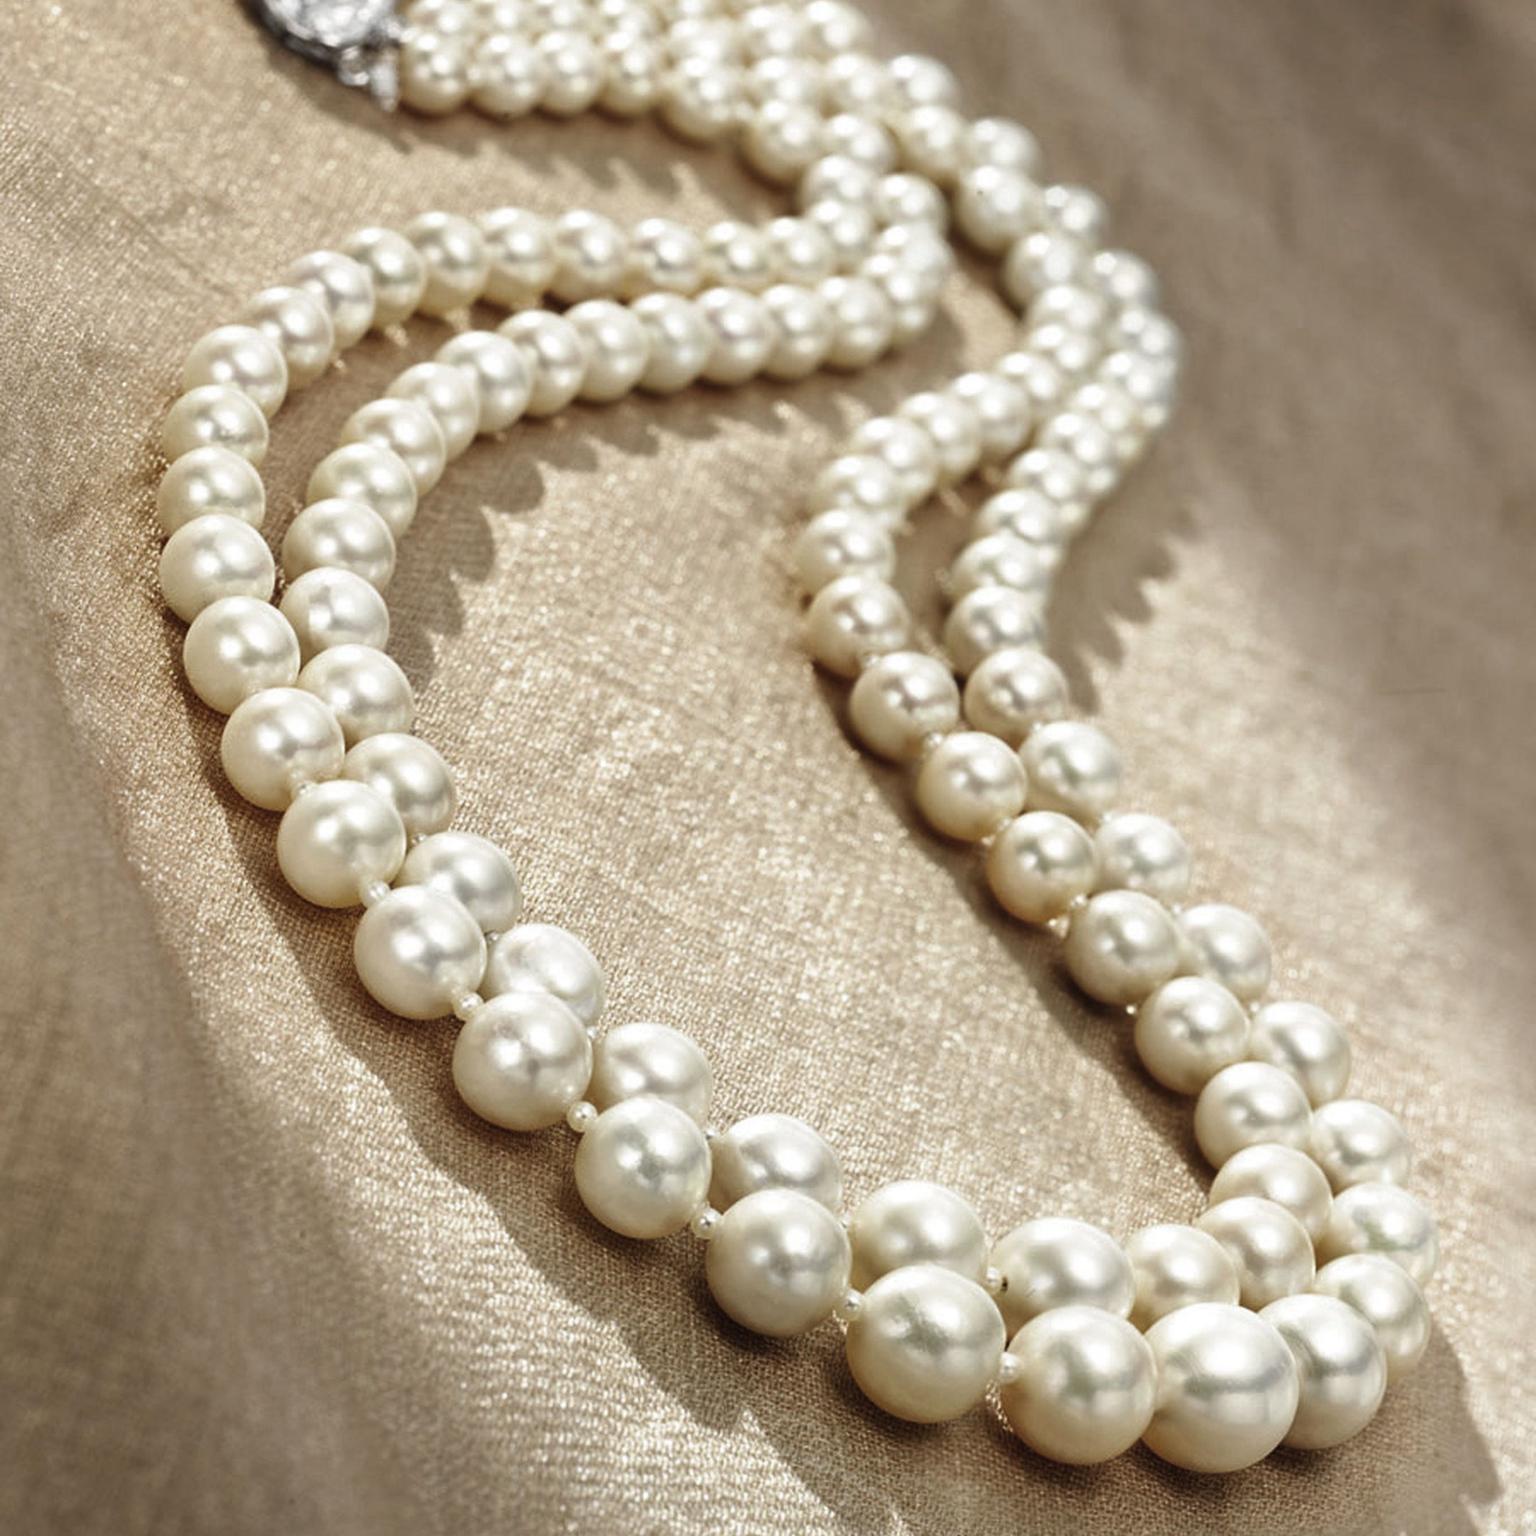 Christies double strand natural pearl necklace